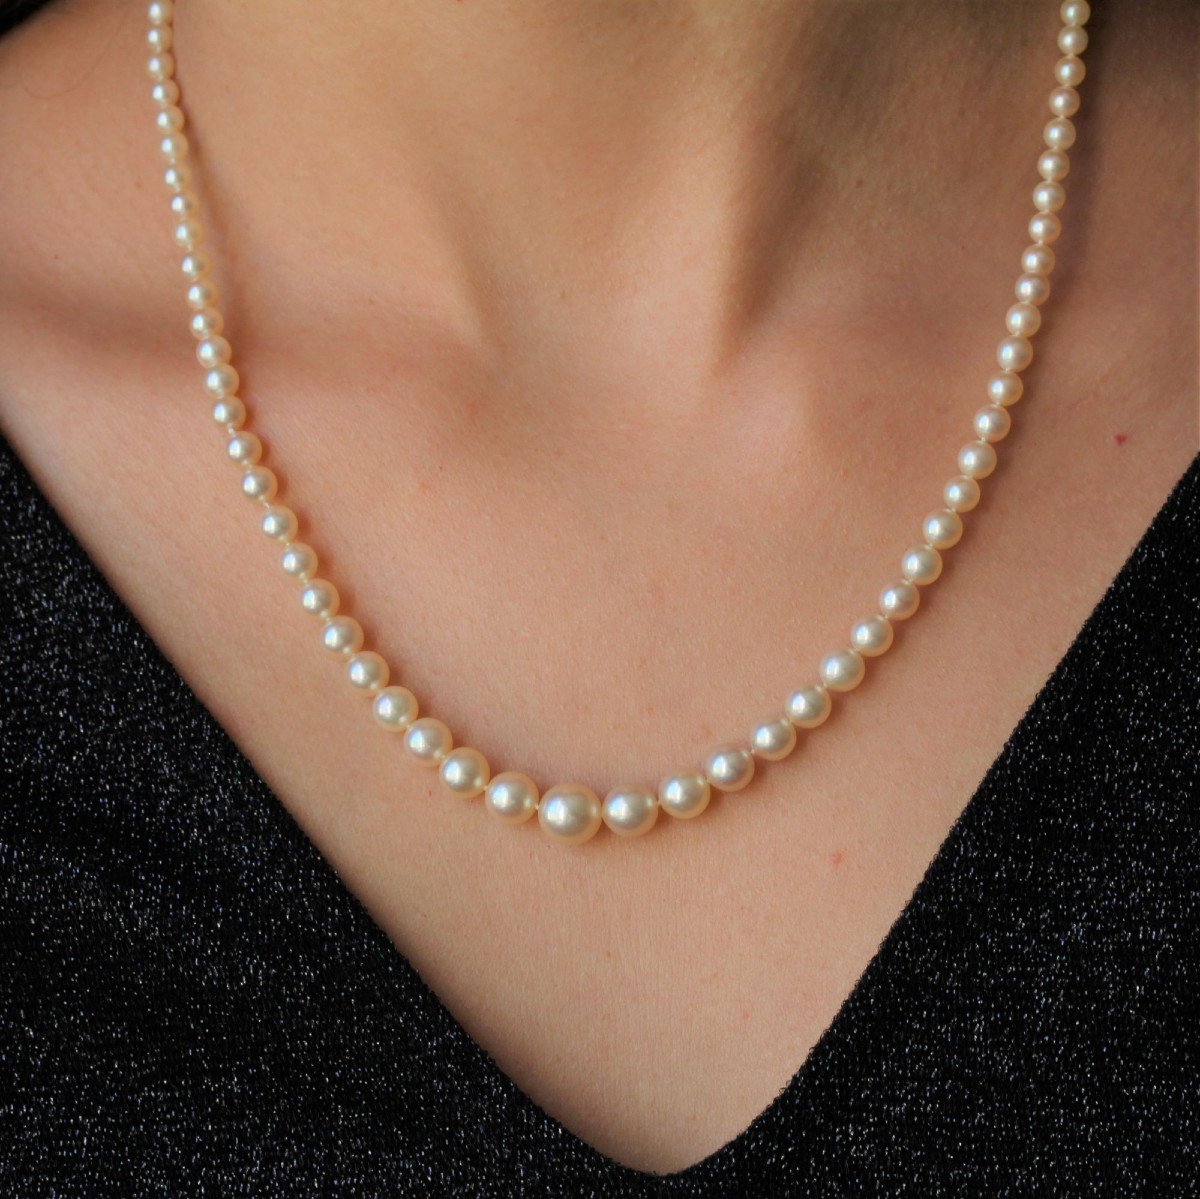 Necklace With Falling Pearls And Its Diamond Clasp-photo-5